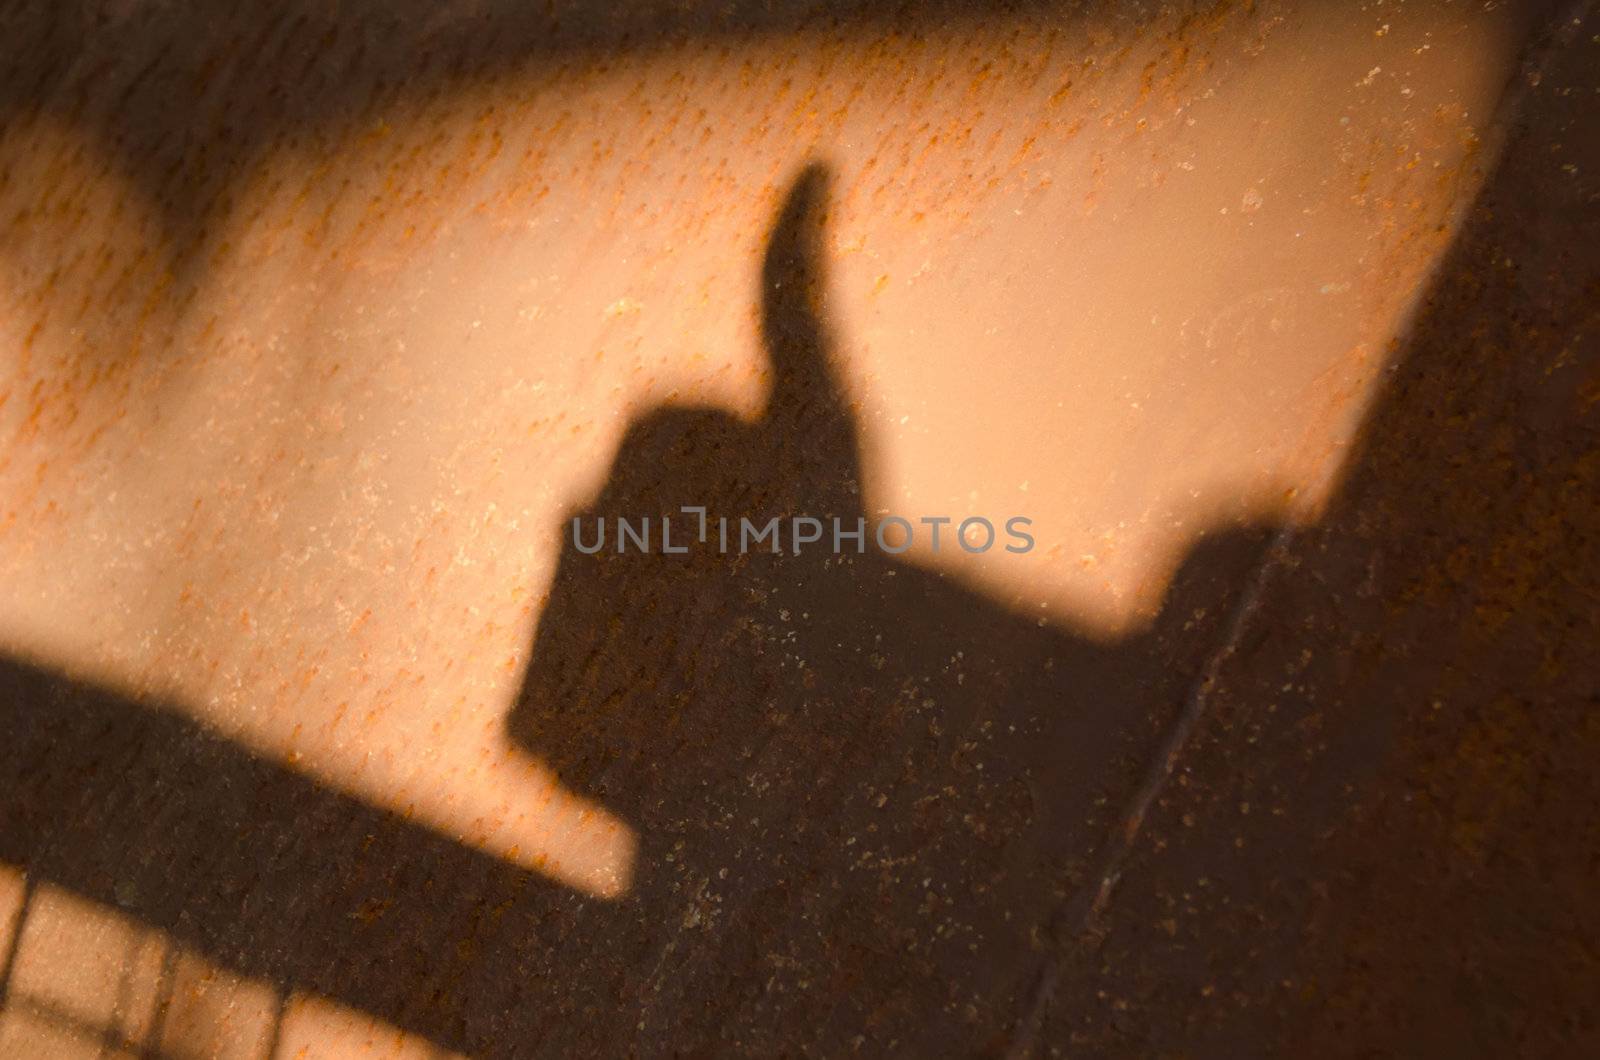 ok the shadow of the hand by njaj